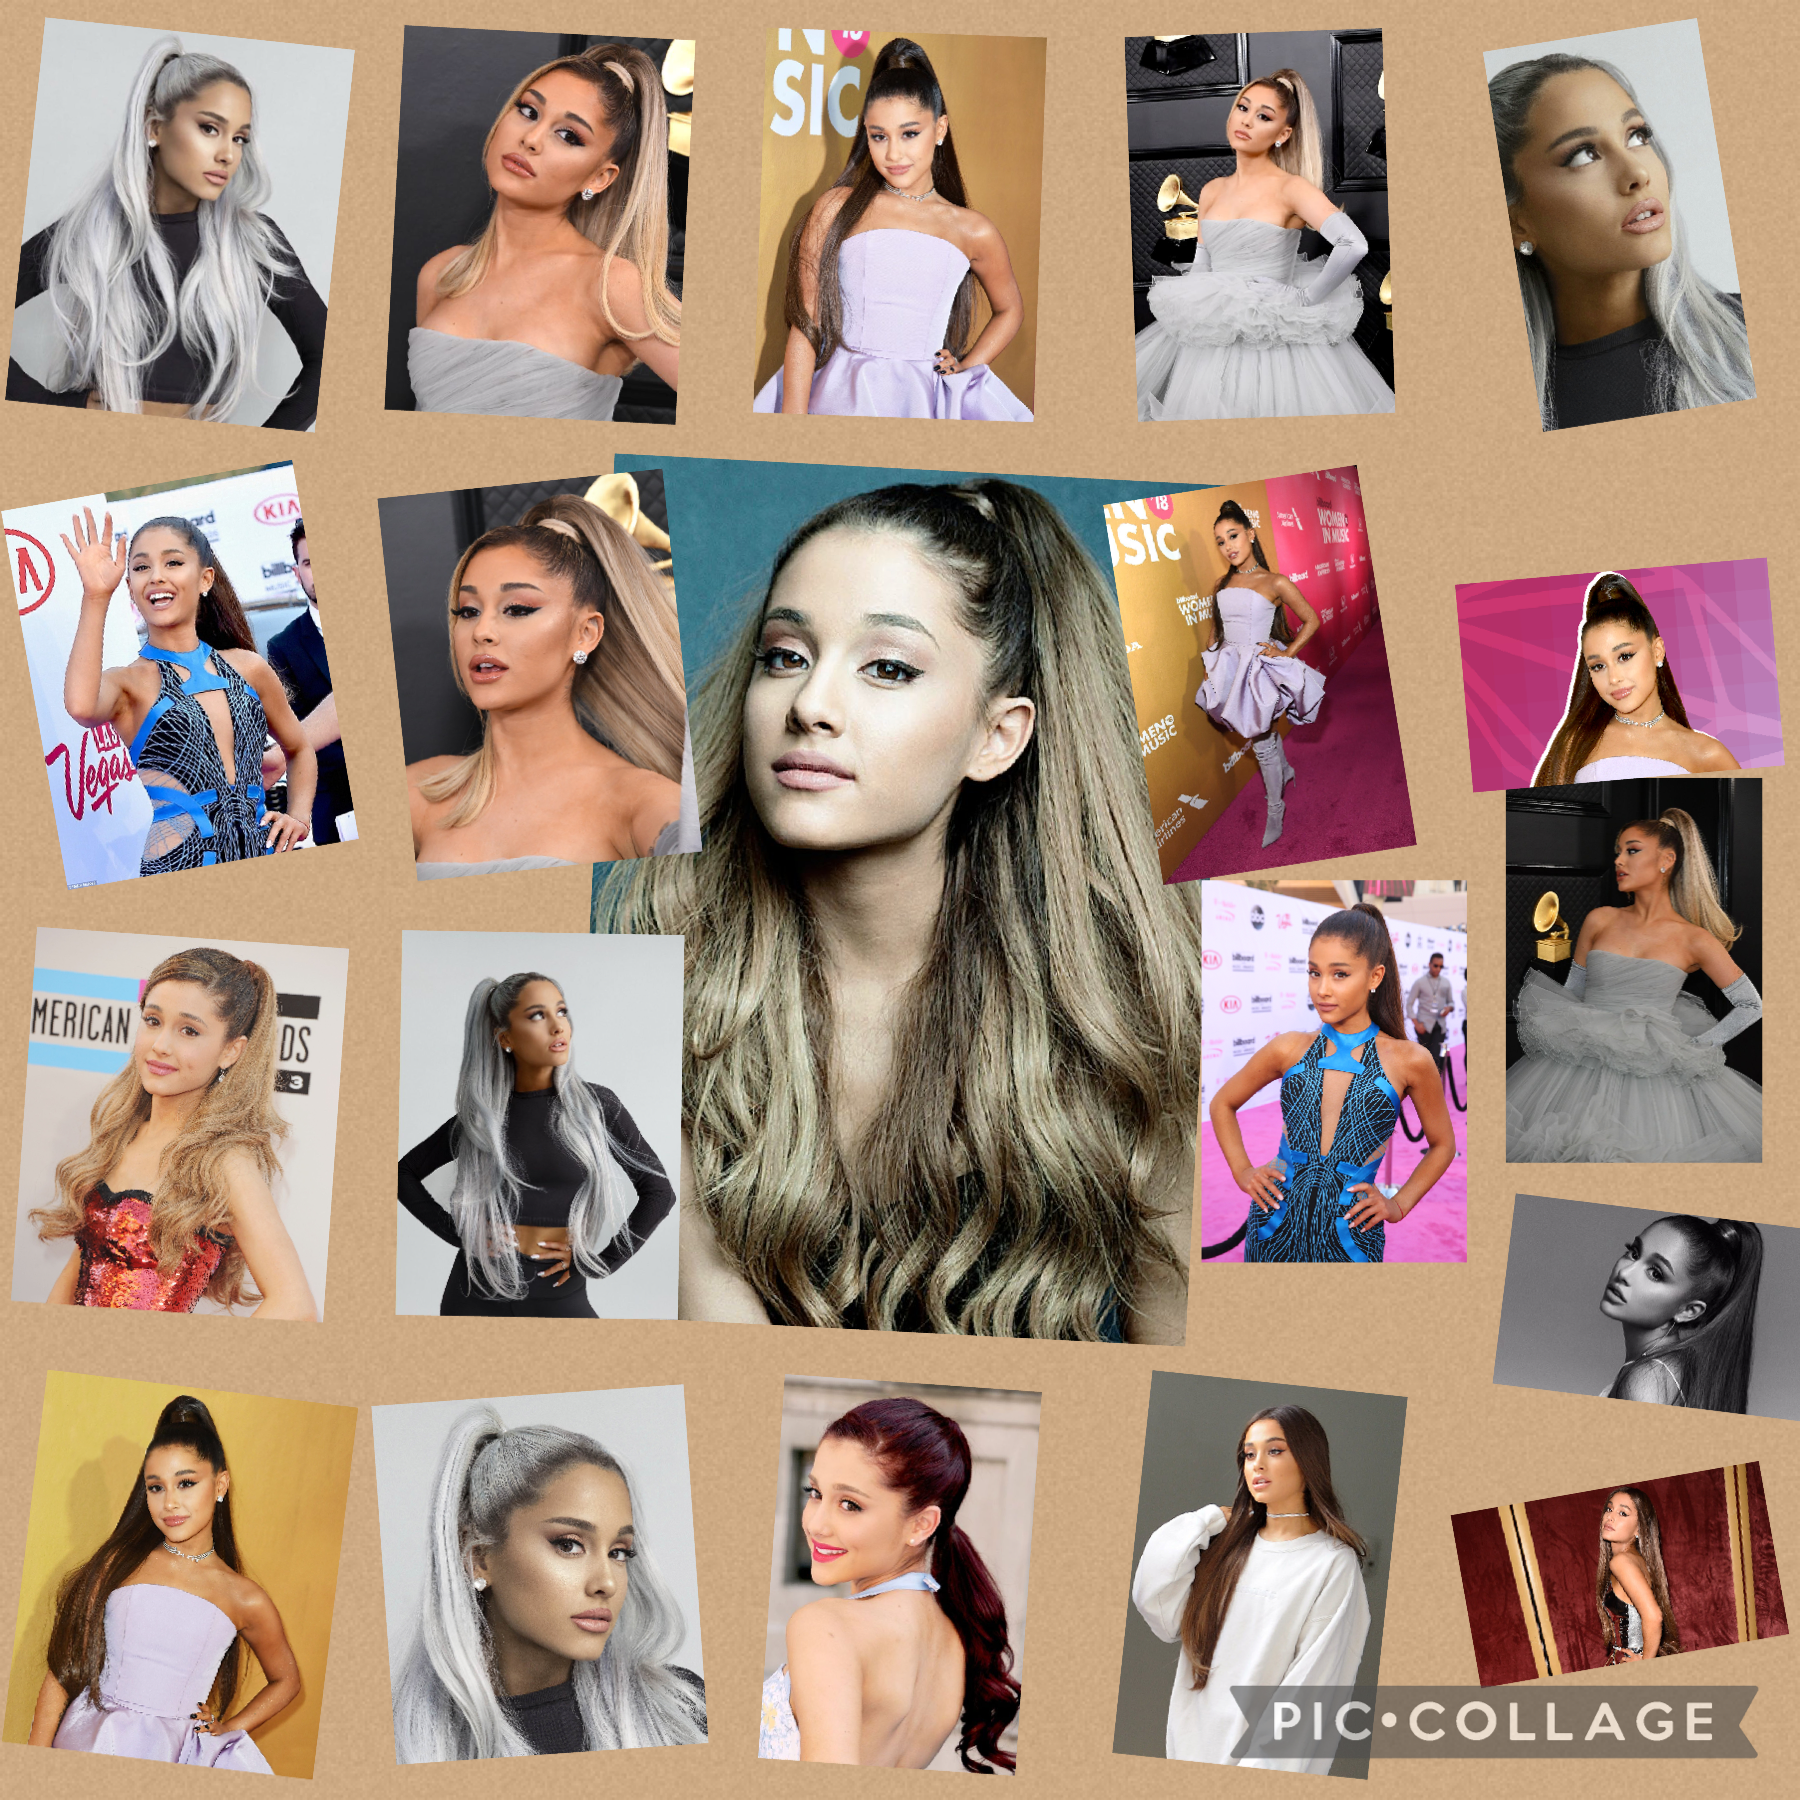 #Ariana Grande photos just random comment if you like it
